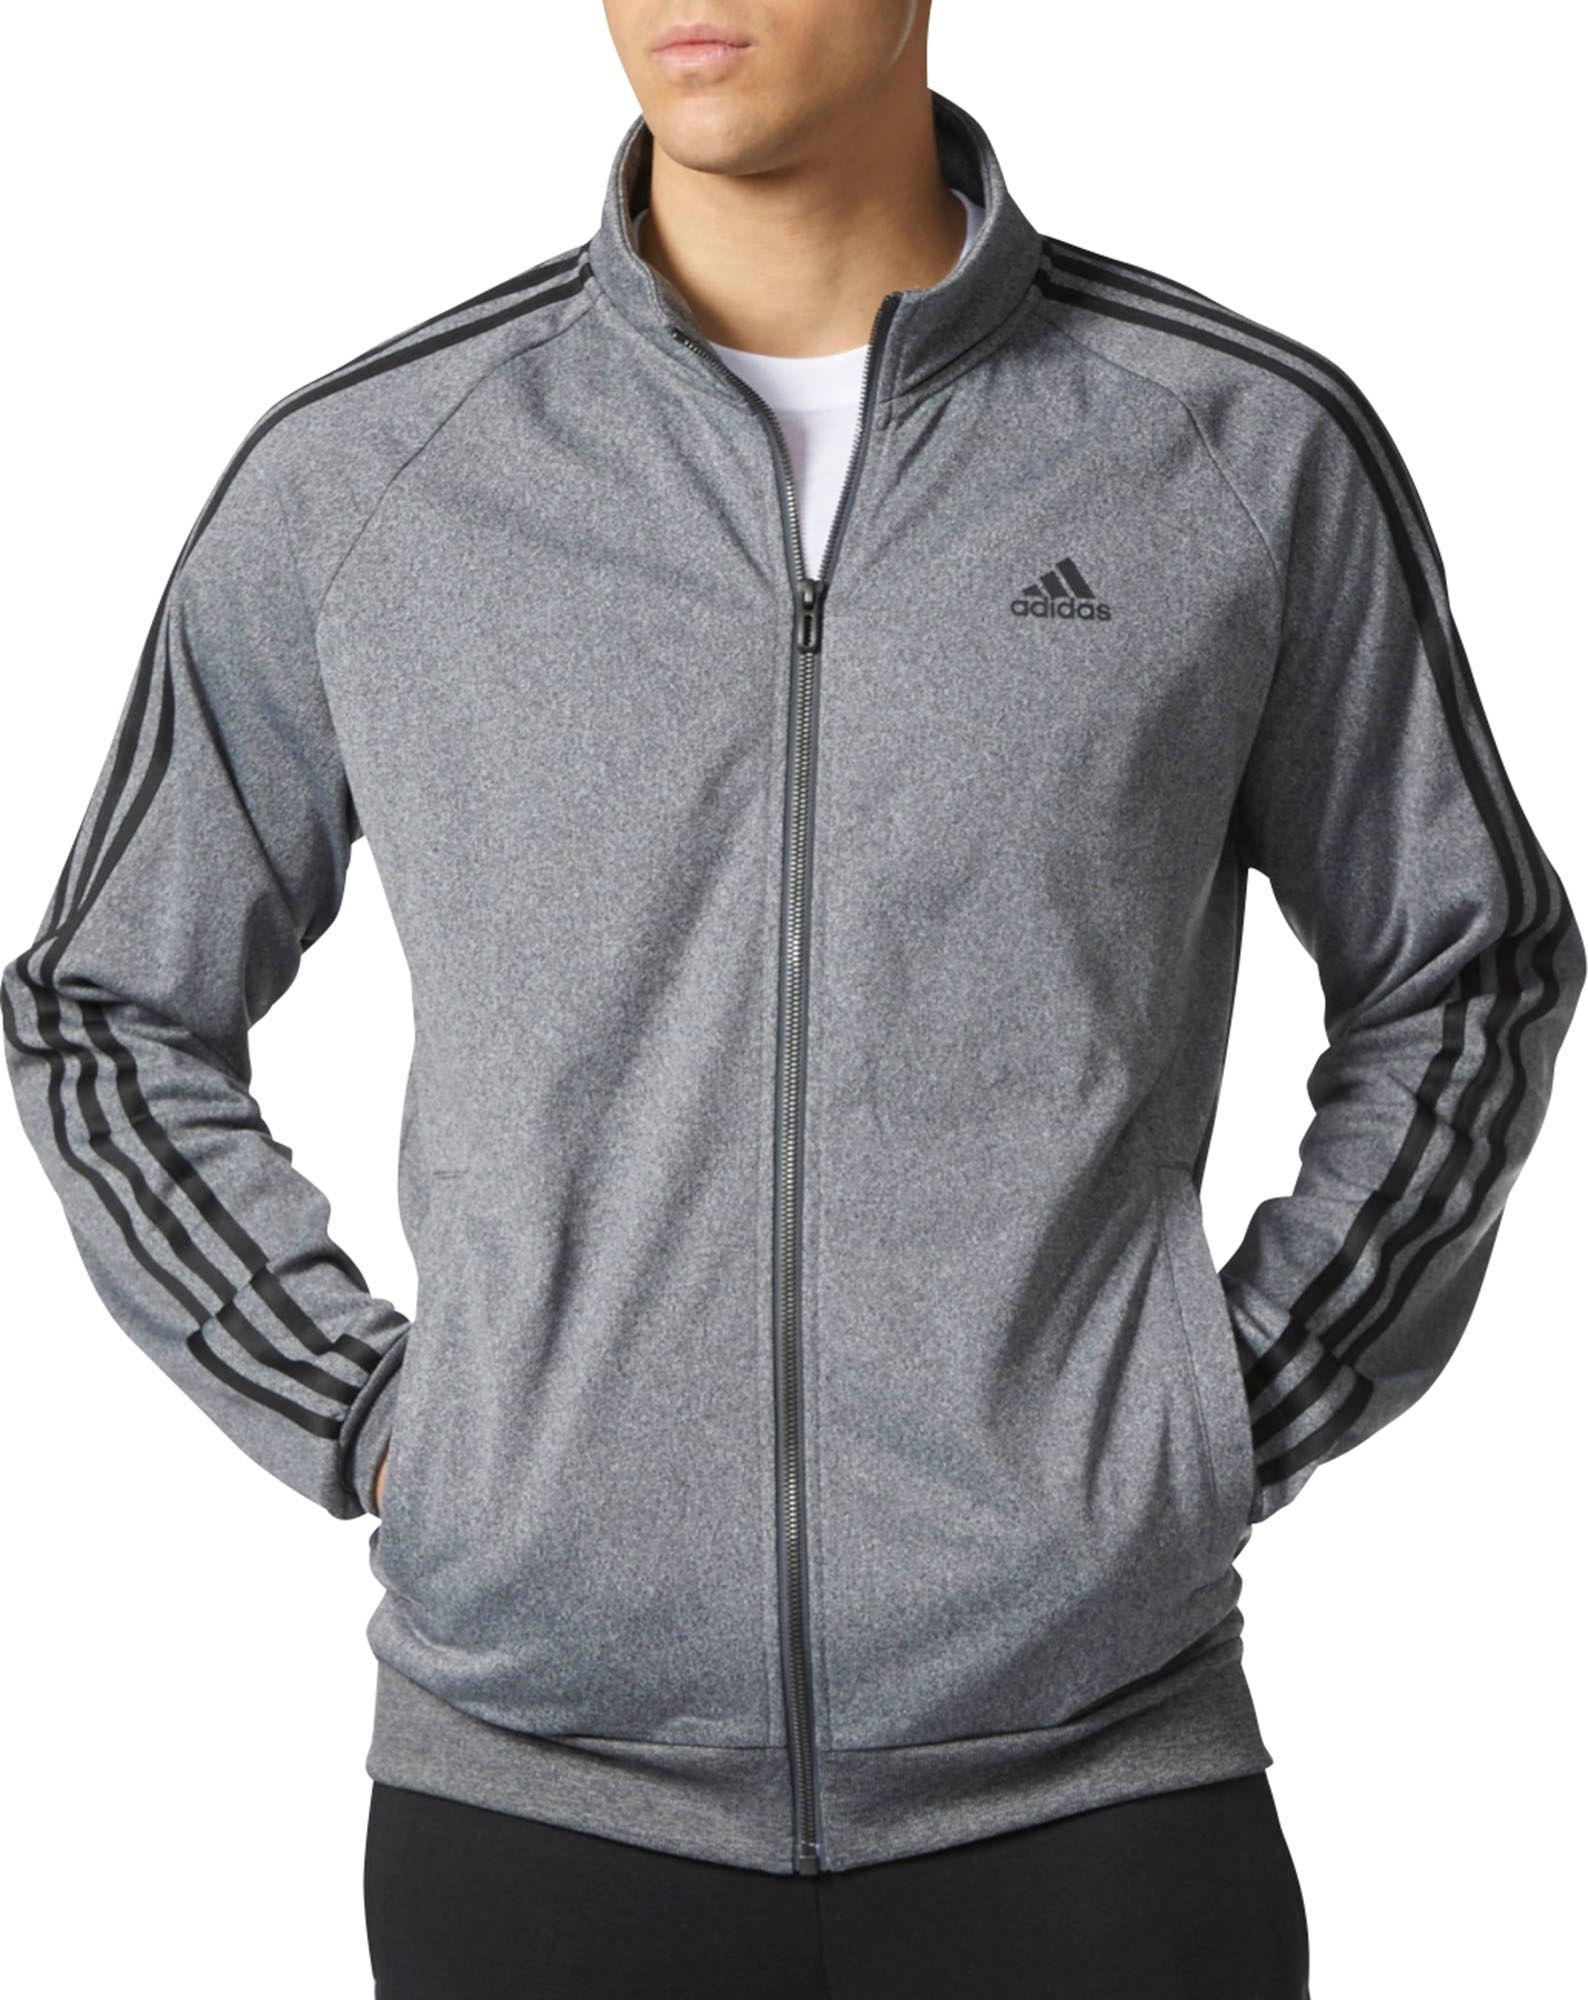 adidas Essentials 3-stripes Track Jacket in Gray for Men - Lyst